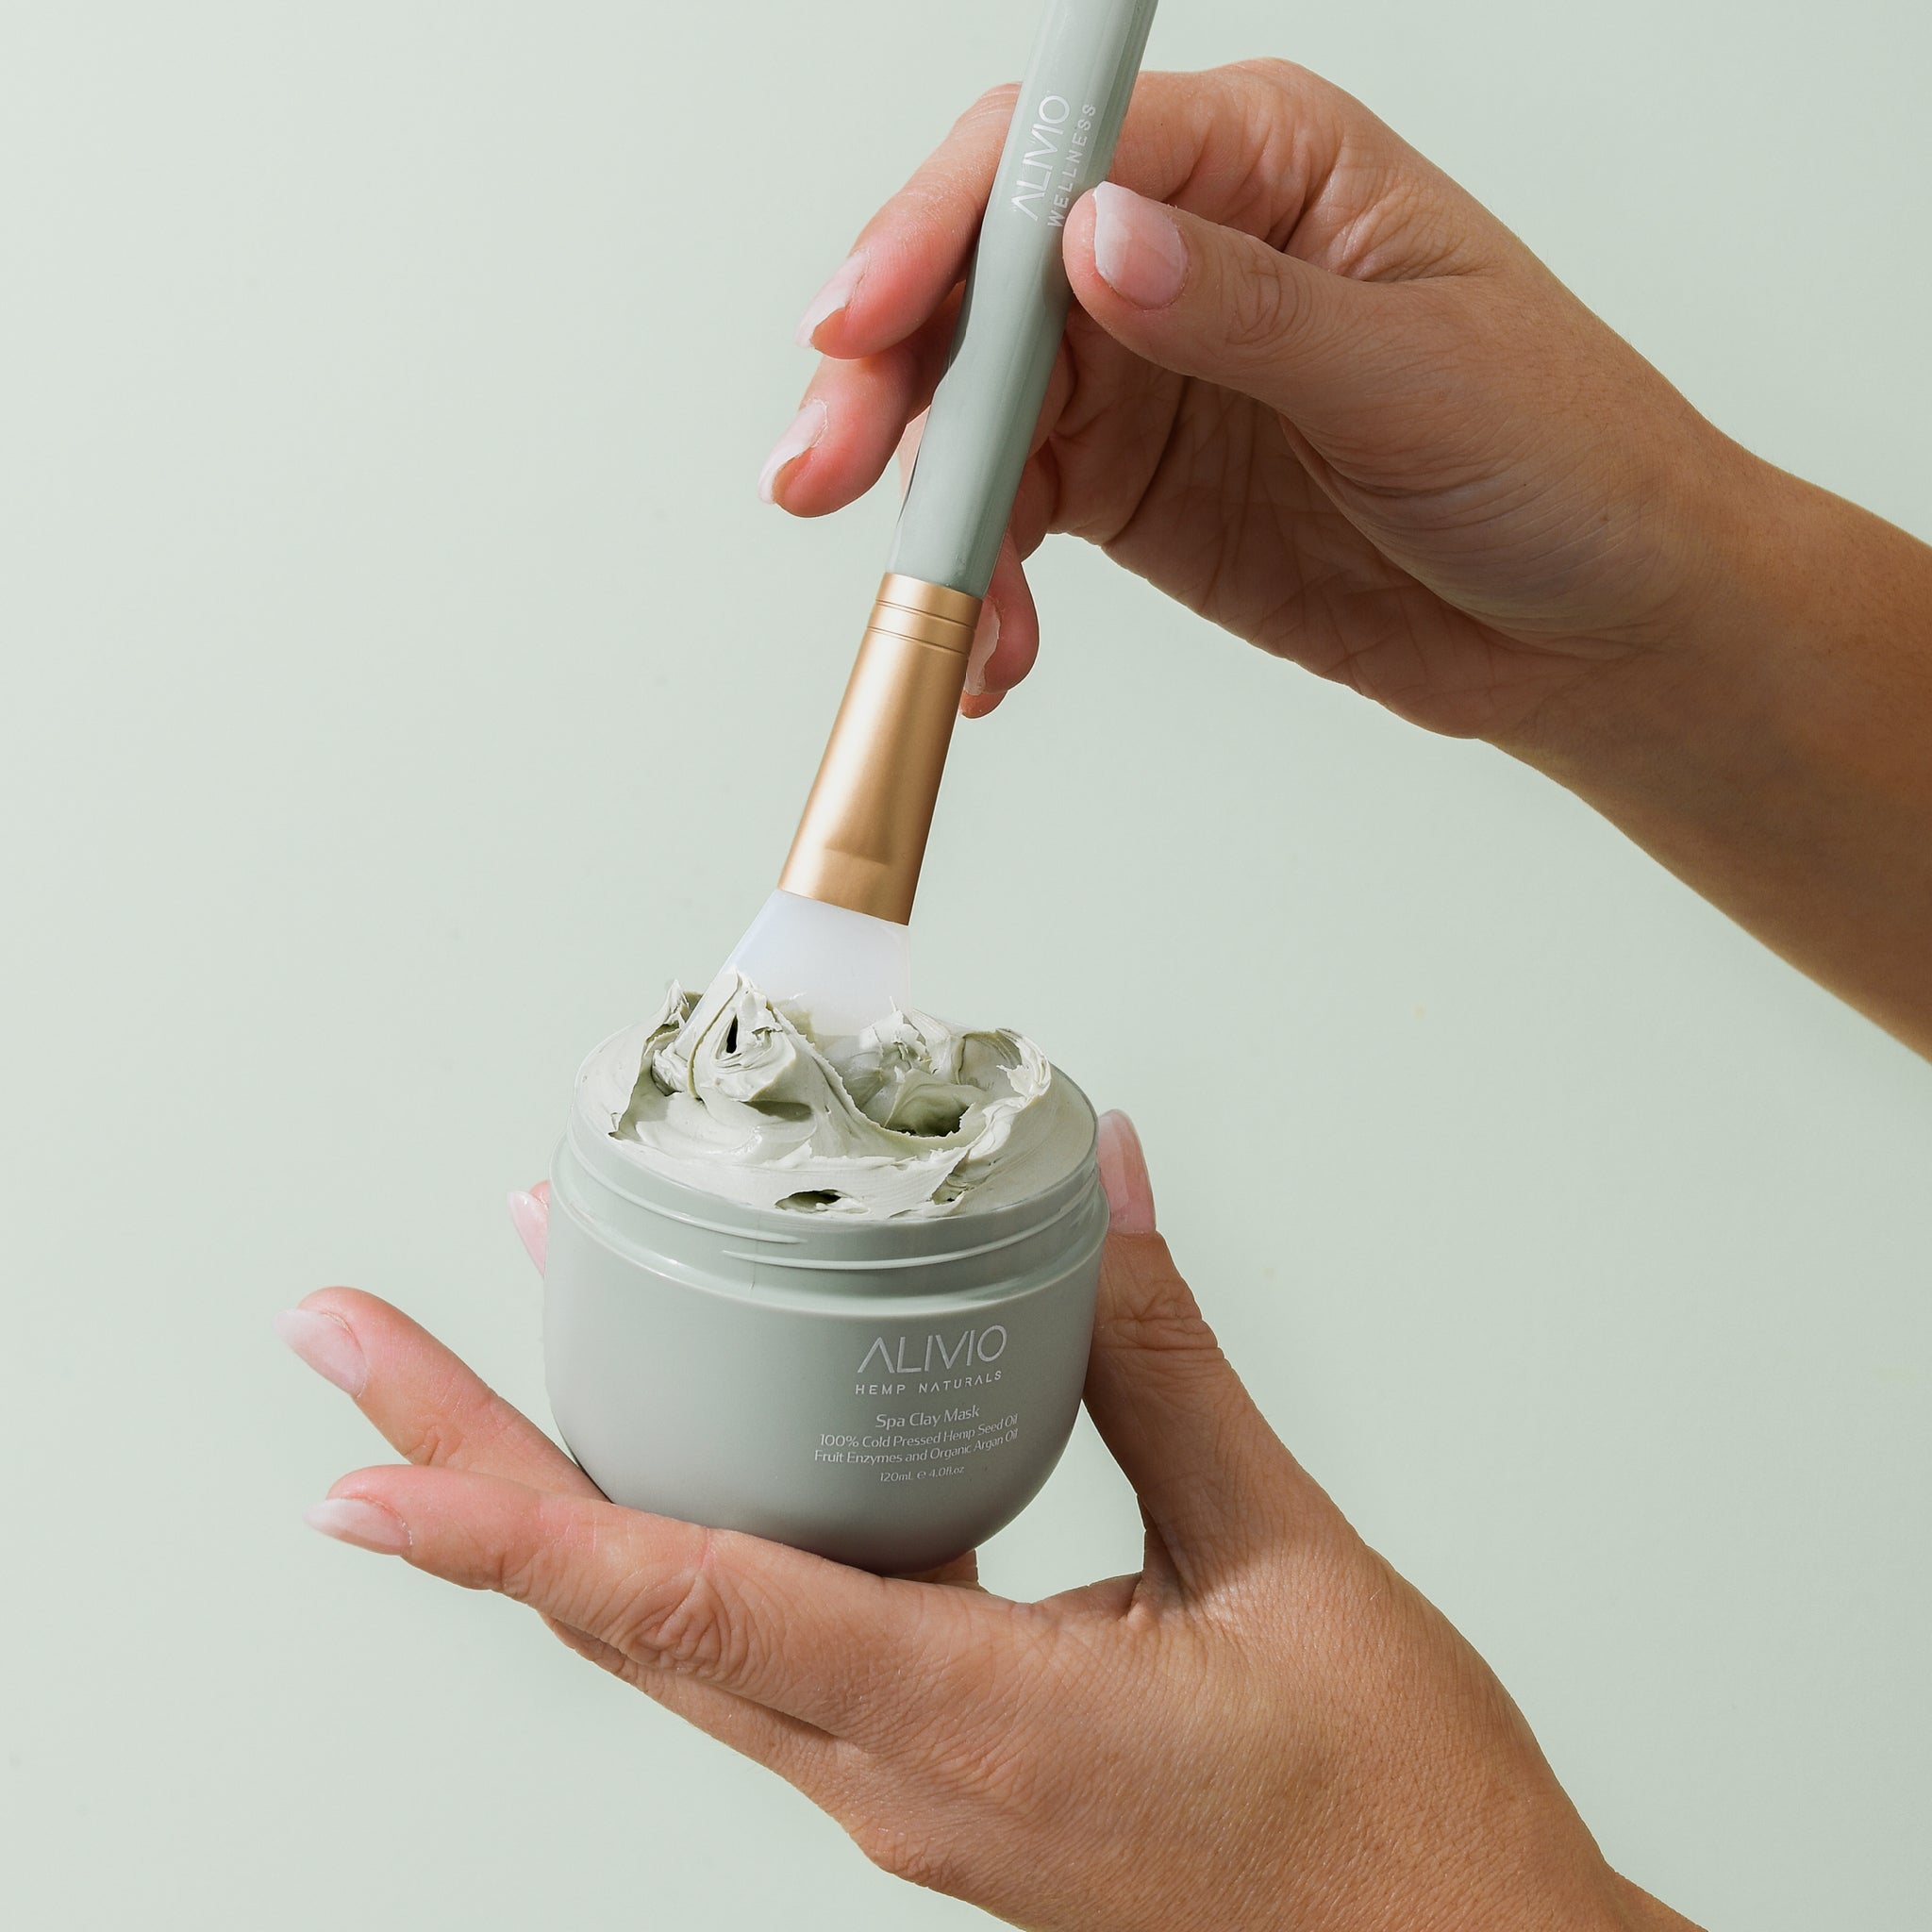 livio Clay Mask in open tub with applicator brush, offering a convenient and effective deep cleansing treatment